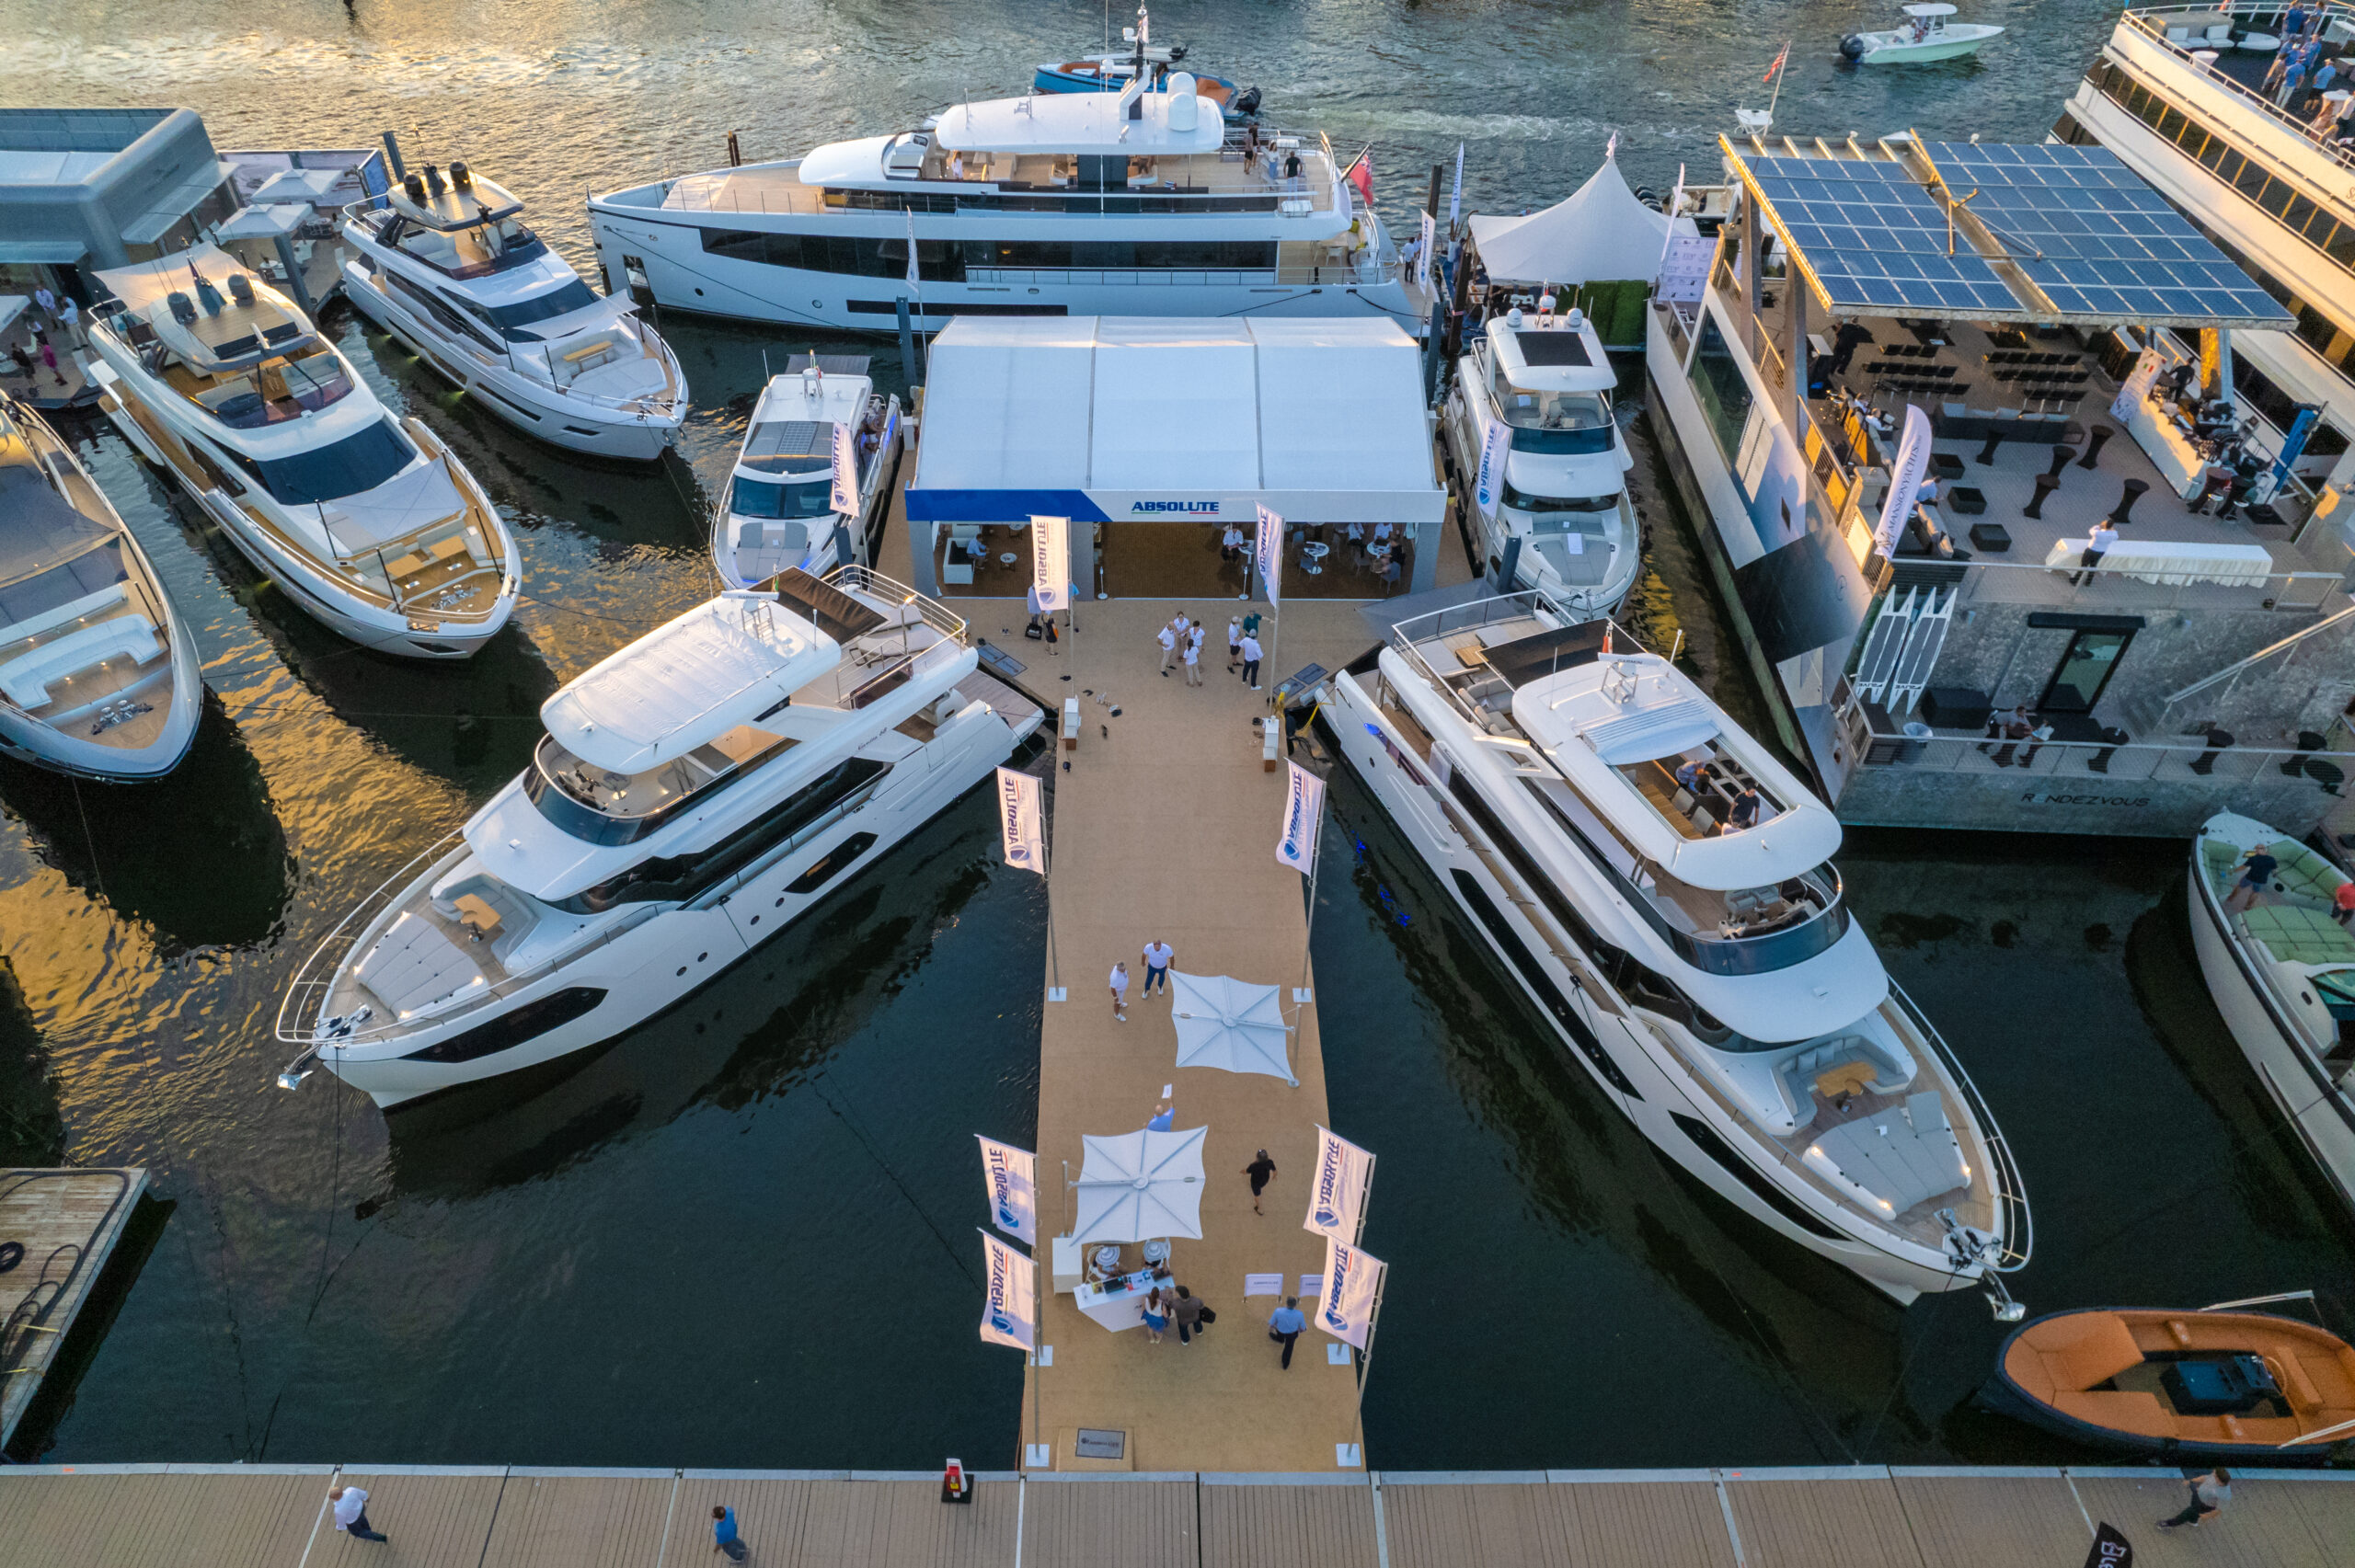 ABSOLUTE AT FORT LAUDERDALE INTERNATIONAL BOAT SHOW